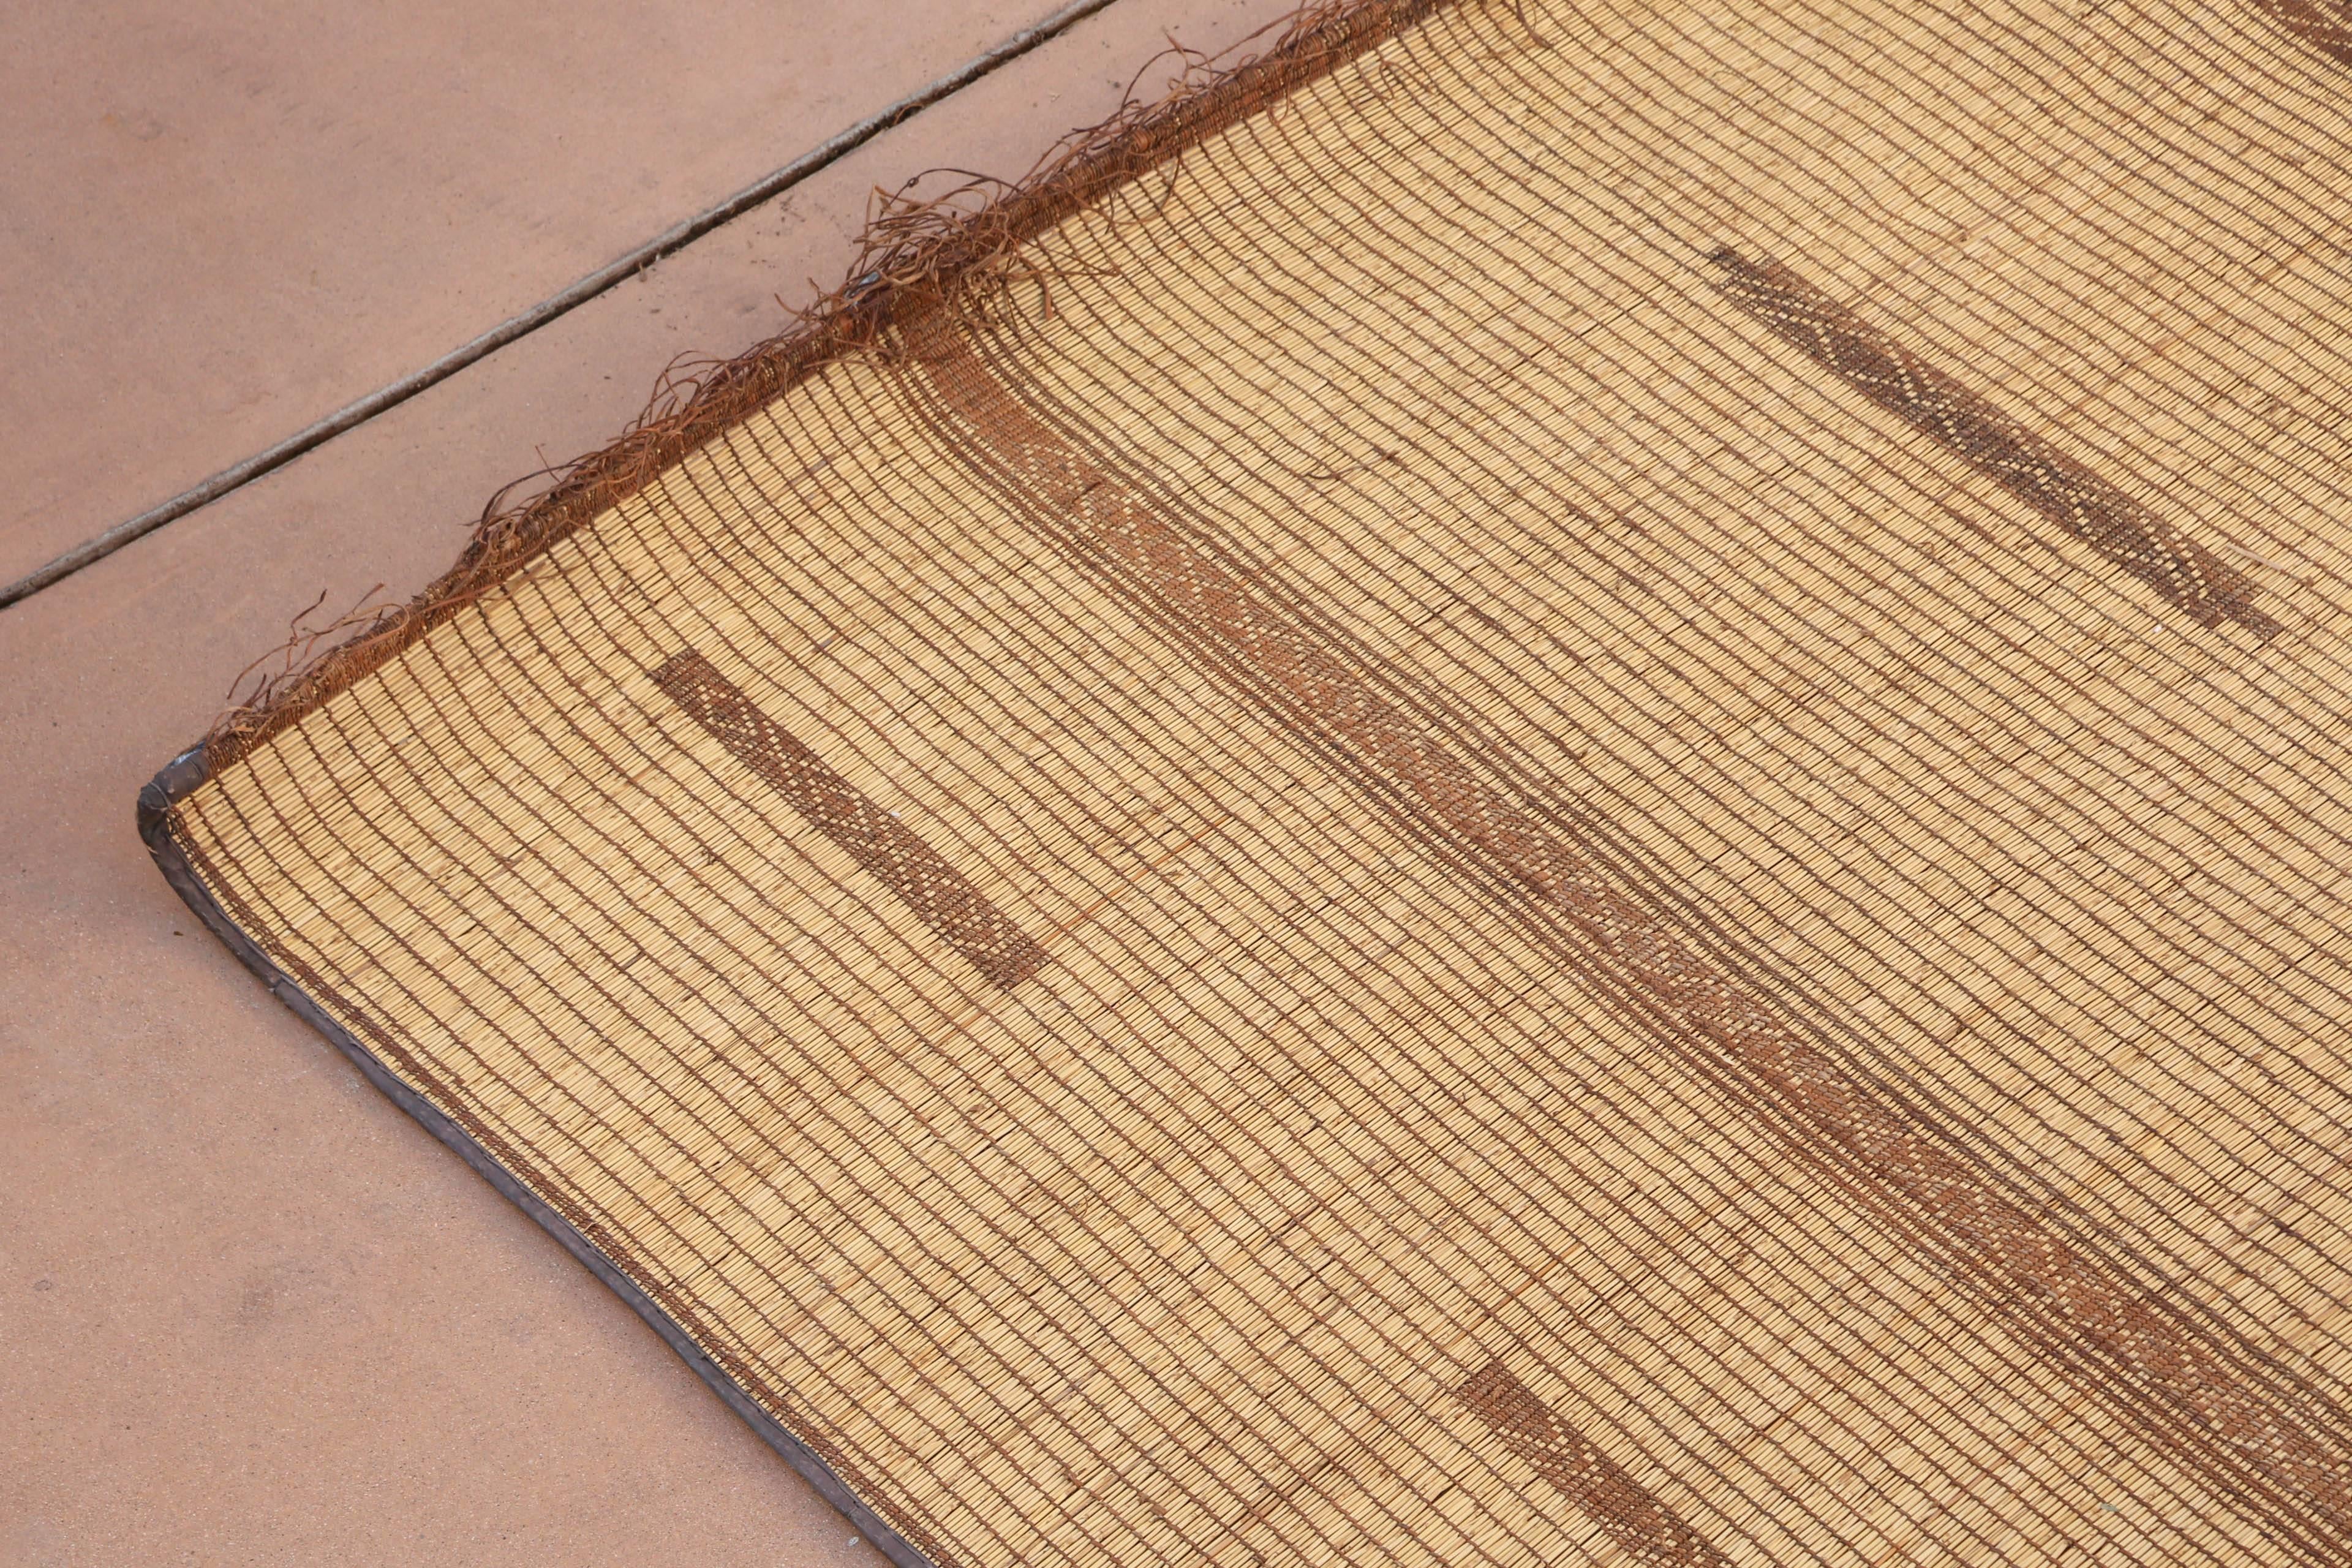 Moroccan Tuareg leather mats are made of dwarf palm tree fibers and hand-woven with leather stripes, this are great to use indoor or outdoor, beautiful brown earth-tone colors. This vintage mid century carpets are made in the desert of Morocco near